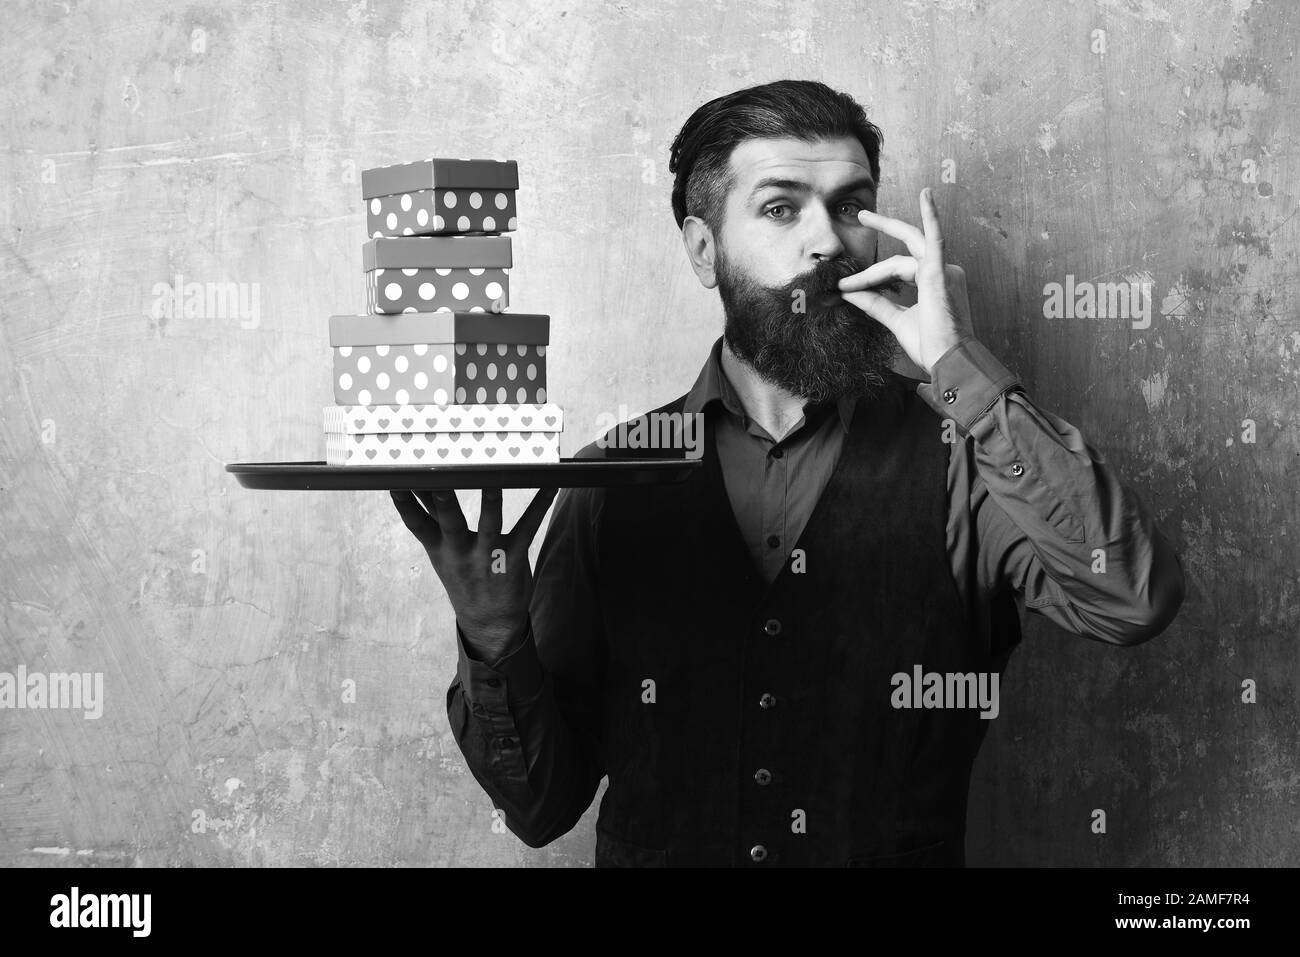 Waiter with presents on tray. Businessman with satisfied face brings gifts for Christmas. Service and purchase concept. Man with beard shows perfect taste sign holding boxes on beige wall background. Stock Photo